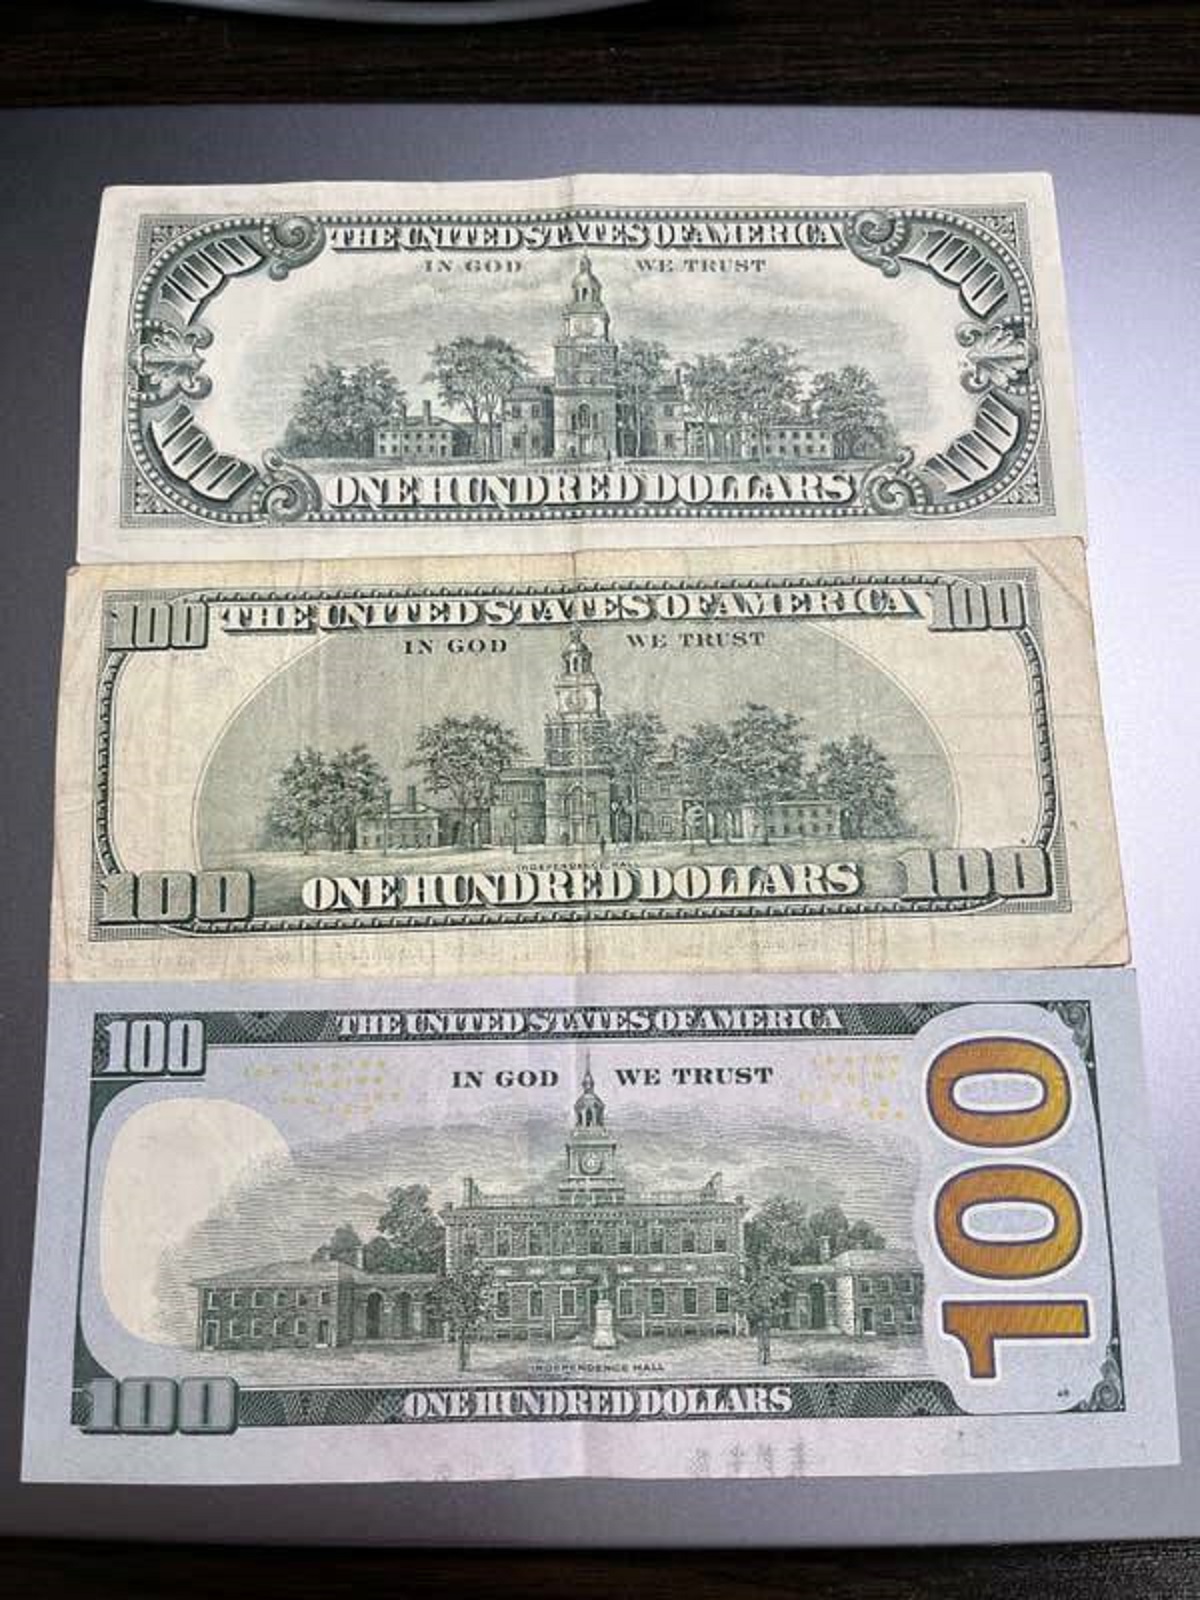 This is what a $100 bill looked like in 1977, 2003, and 2017: